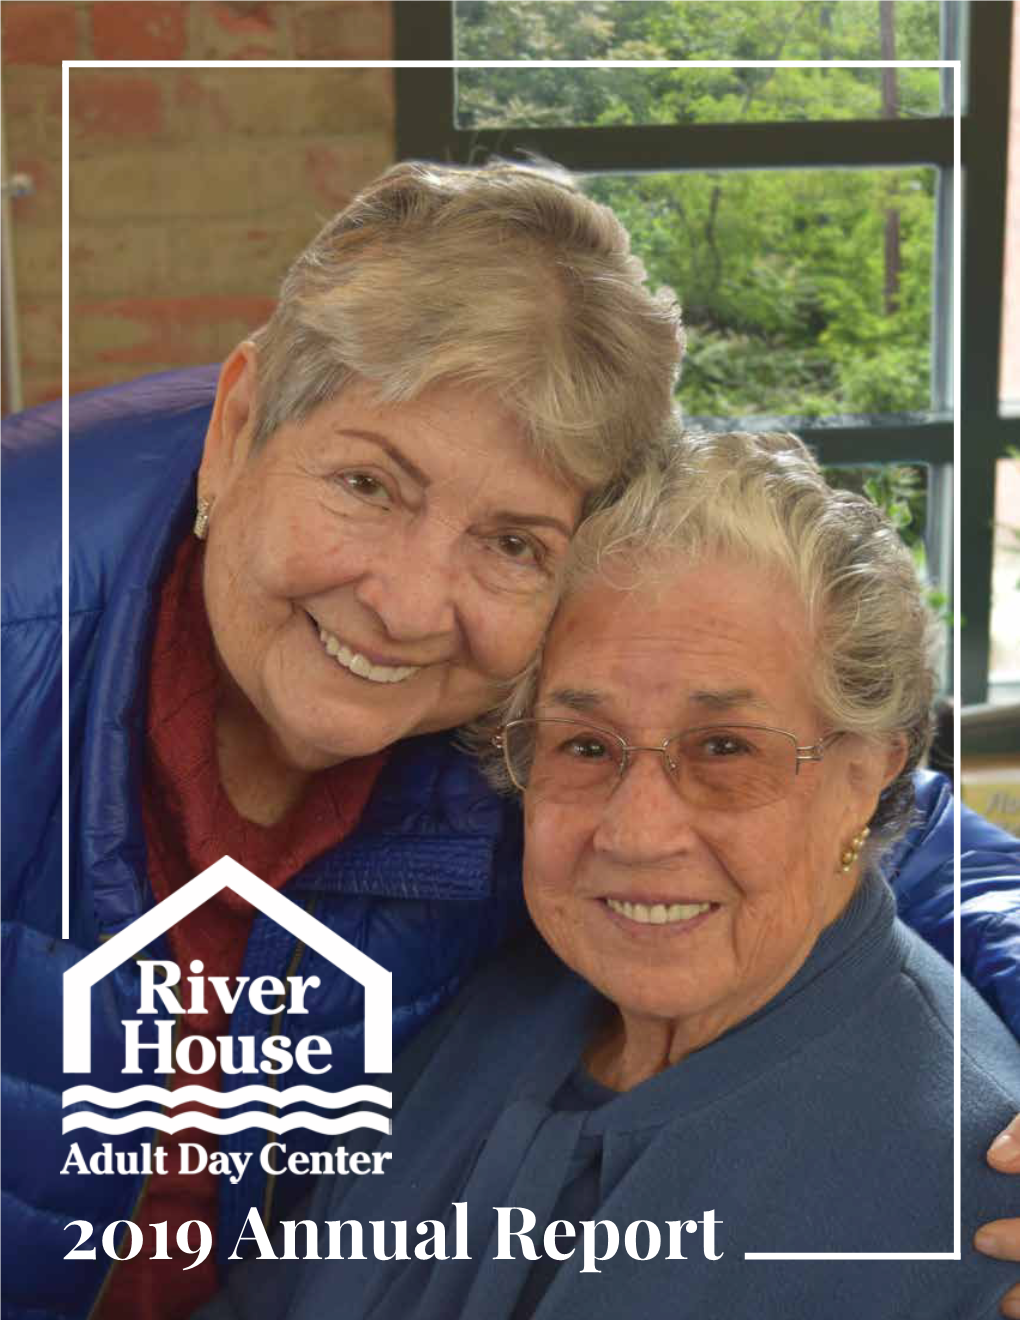 2019 Annual Report Working Together Towards a Single Mission: Adult Day Care That Works for All Families